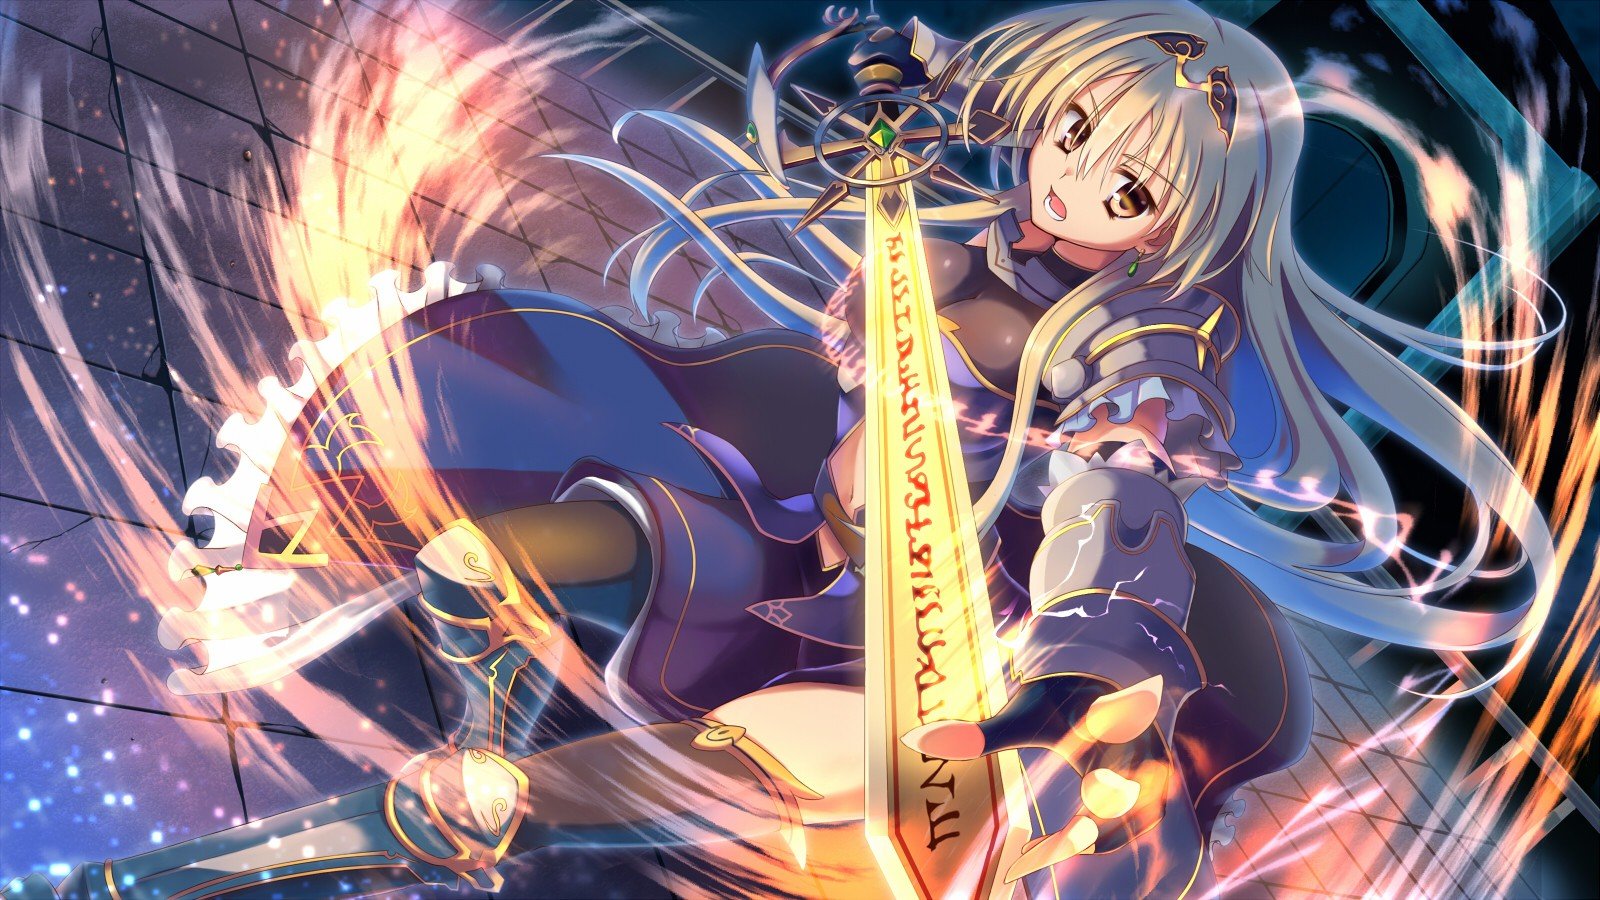 blondes, Dress, Long, Hair, Weapons, Brown, Eyes, Armor, Open, Mouth, Anime, Girls, Gauntlets, Swords, Original, Characters Wallpaper